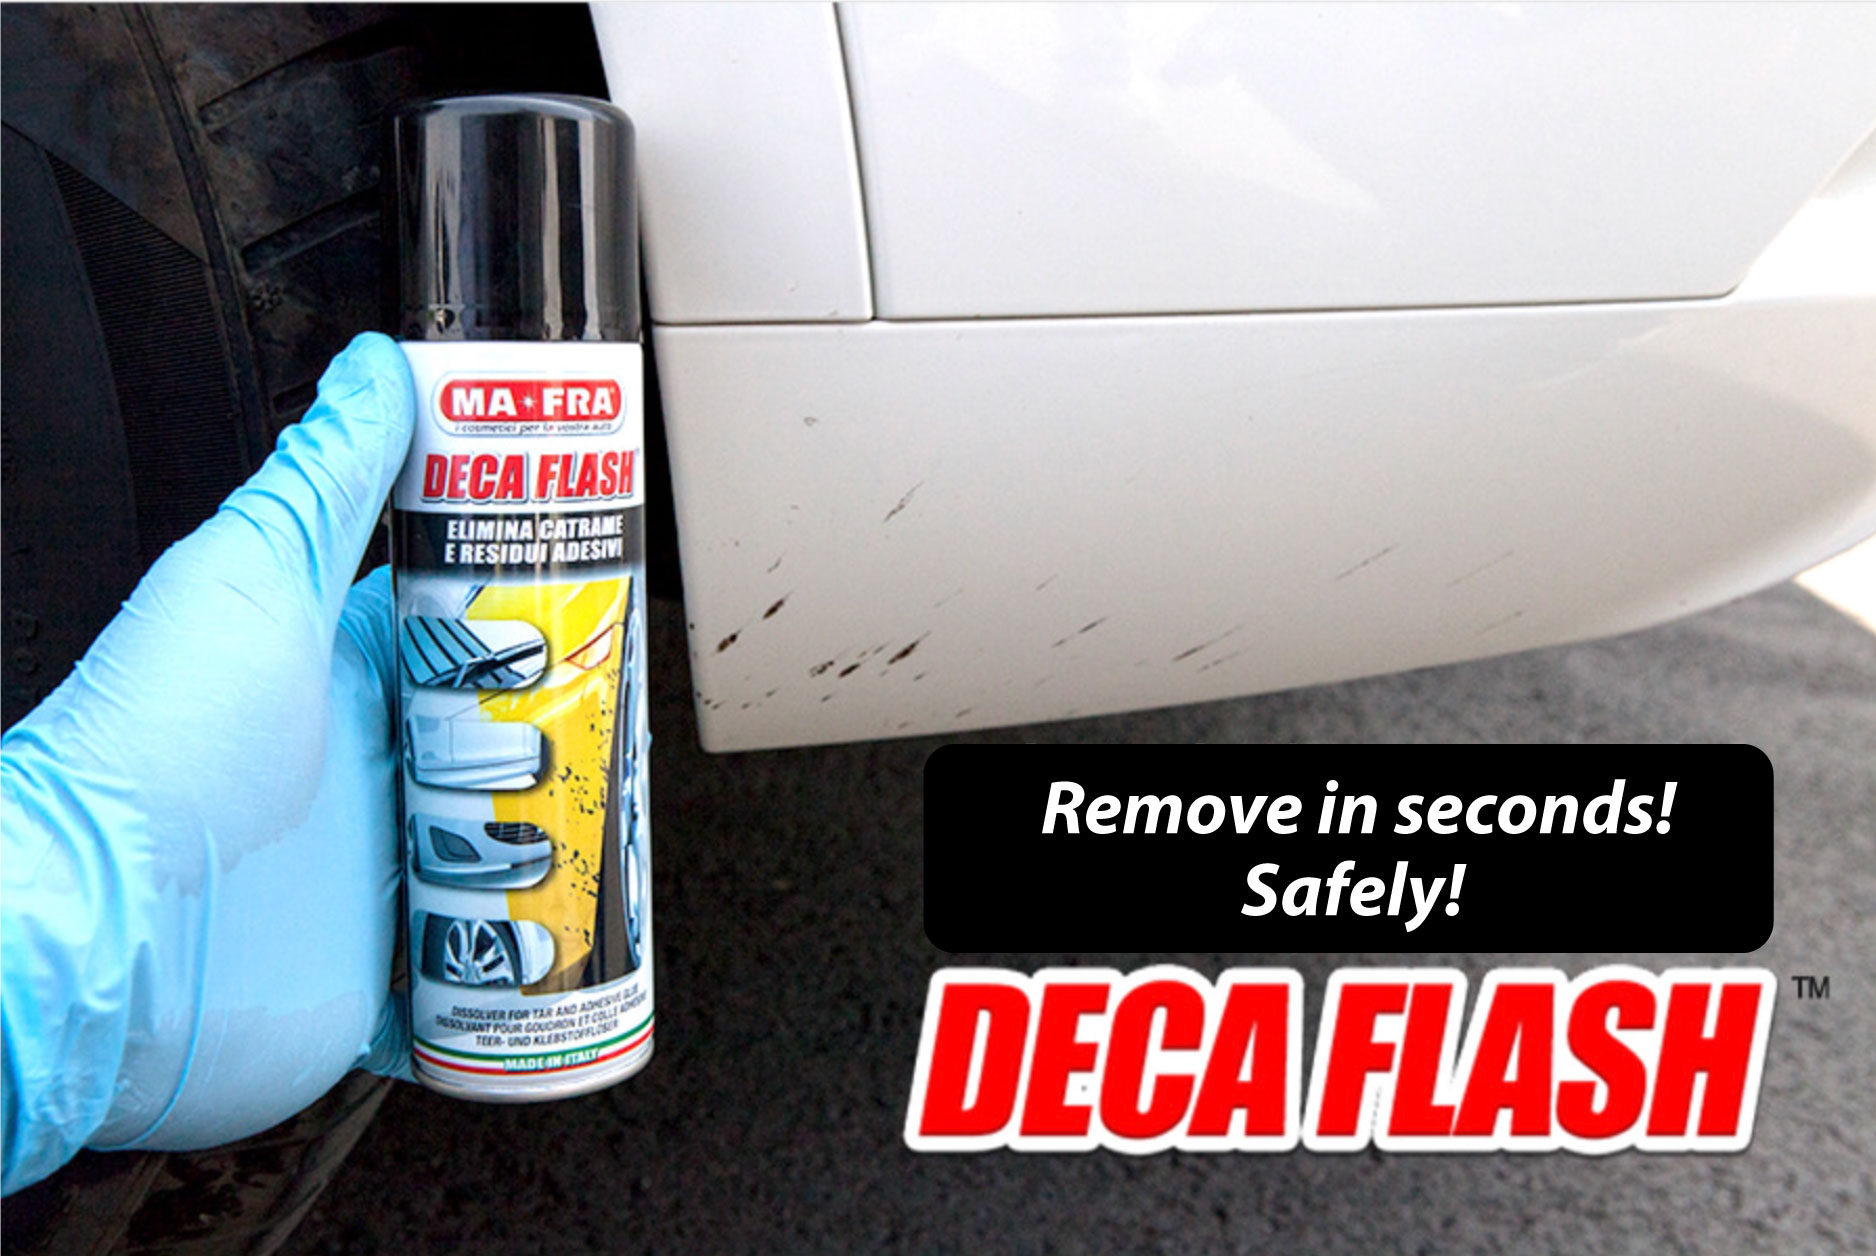 Mafra Deca Flash 250ml (Removes New and Old Sticker Adhesives Road Tar Stains and Stubborn Stains New Car Parrafin Wax) - Mafra Official Store Singapore